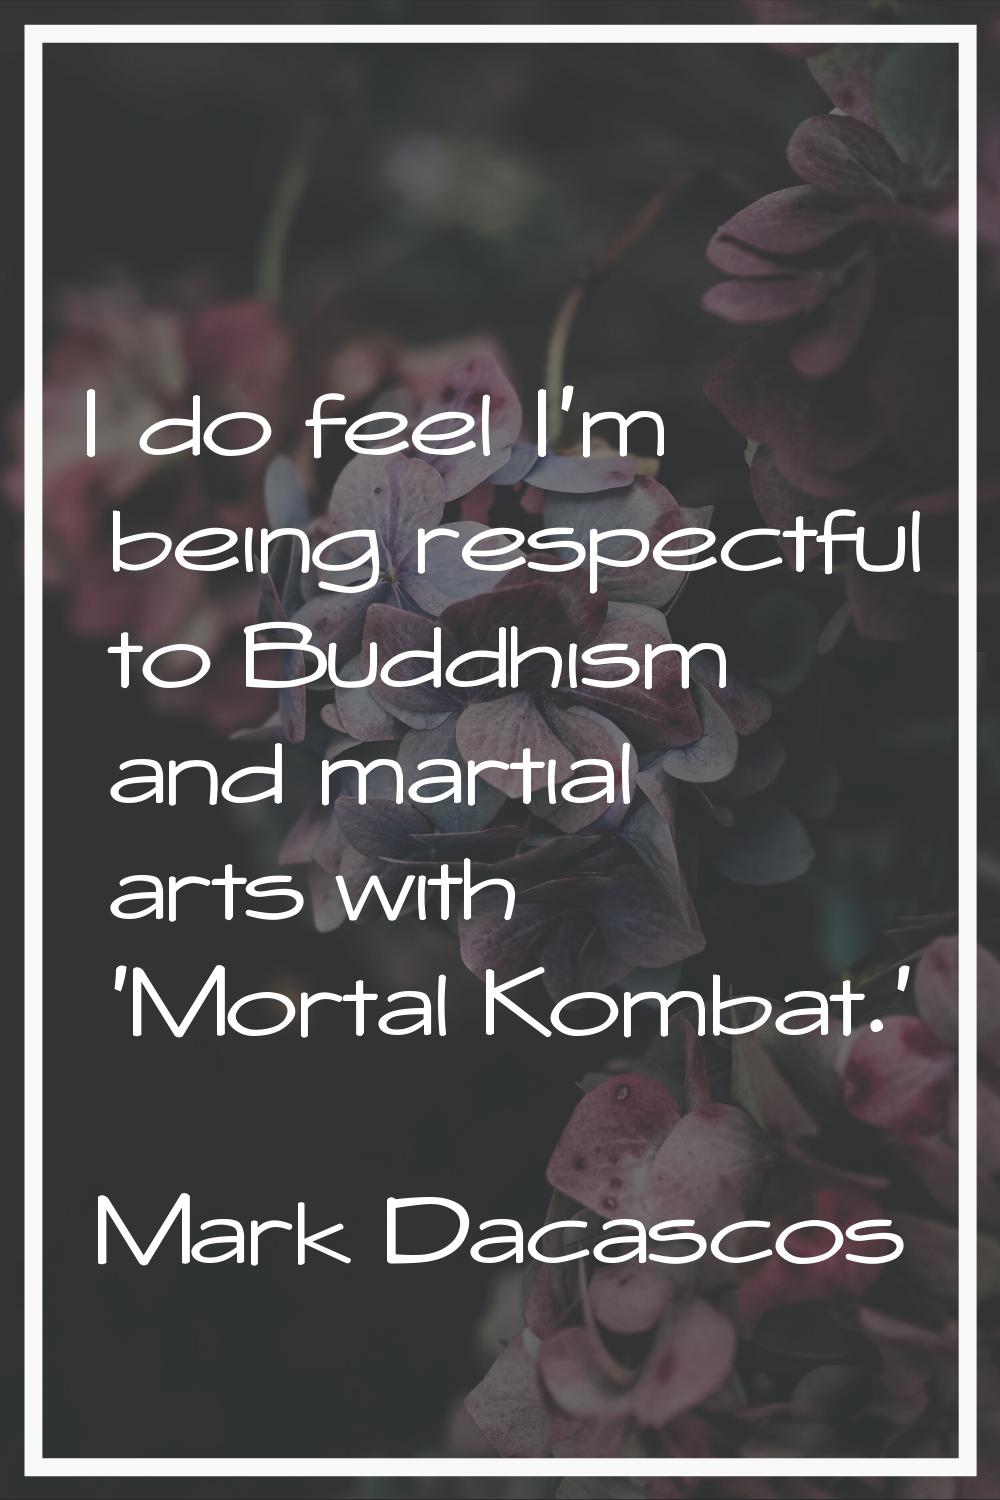 I do feel I'm being respectful to Buddhism and martial arts with 'Mortal Kombat.'